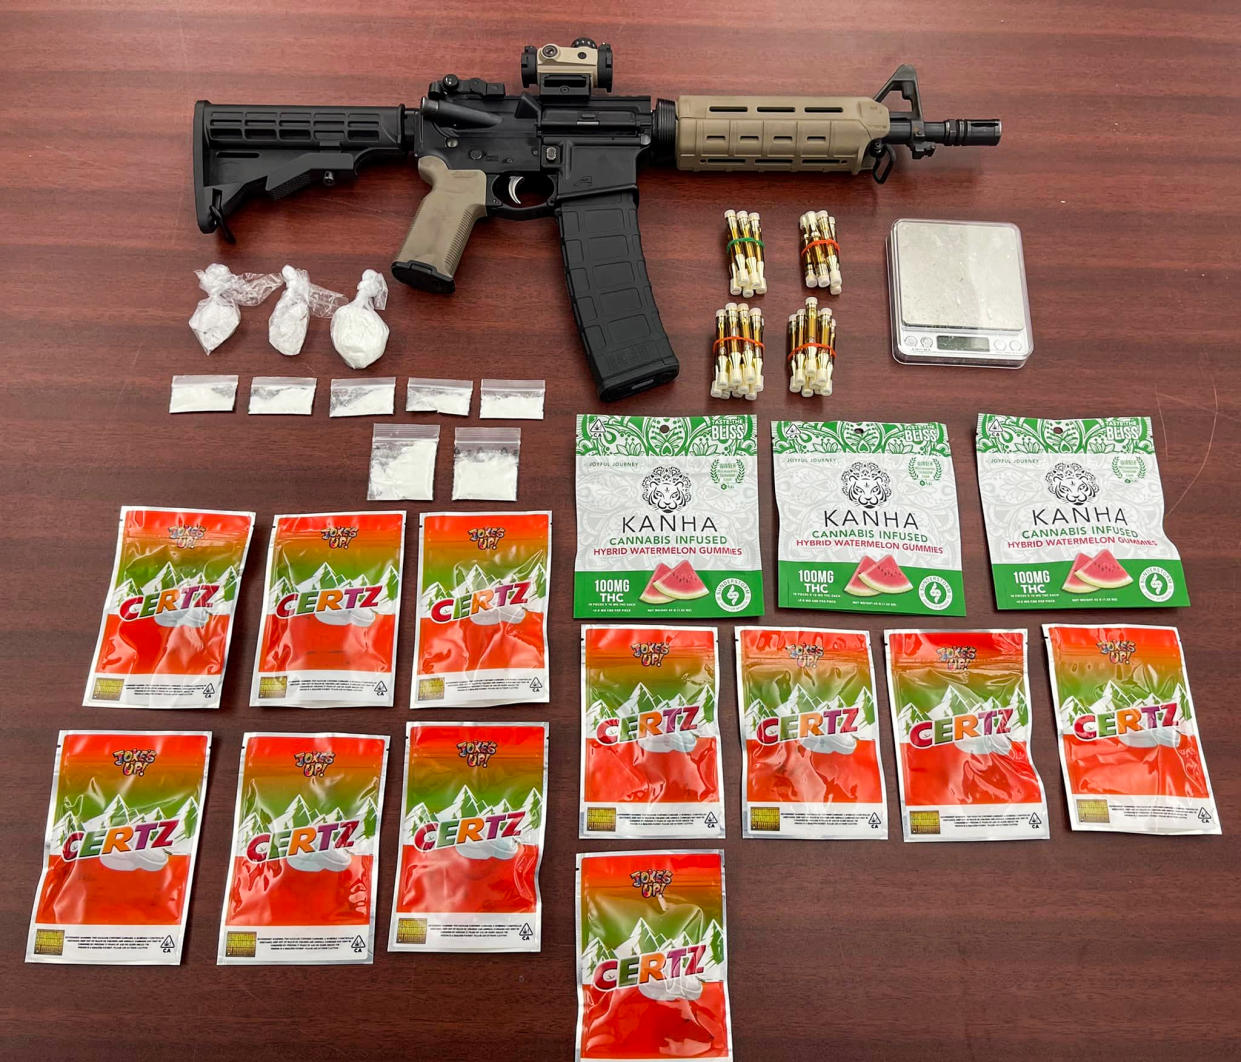 Evidence seized by the Livingston Parish Sheriff's Office following the arrest Steven McCarthy and public official Bridgette Hull. (Livingston Parish Sheriff's Office)